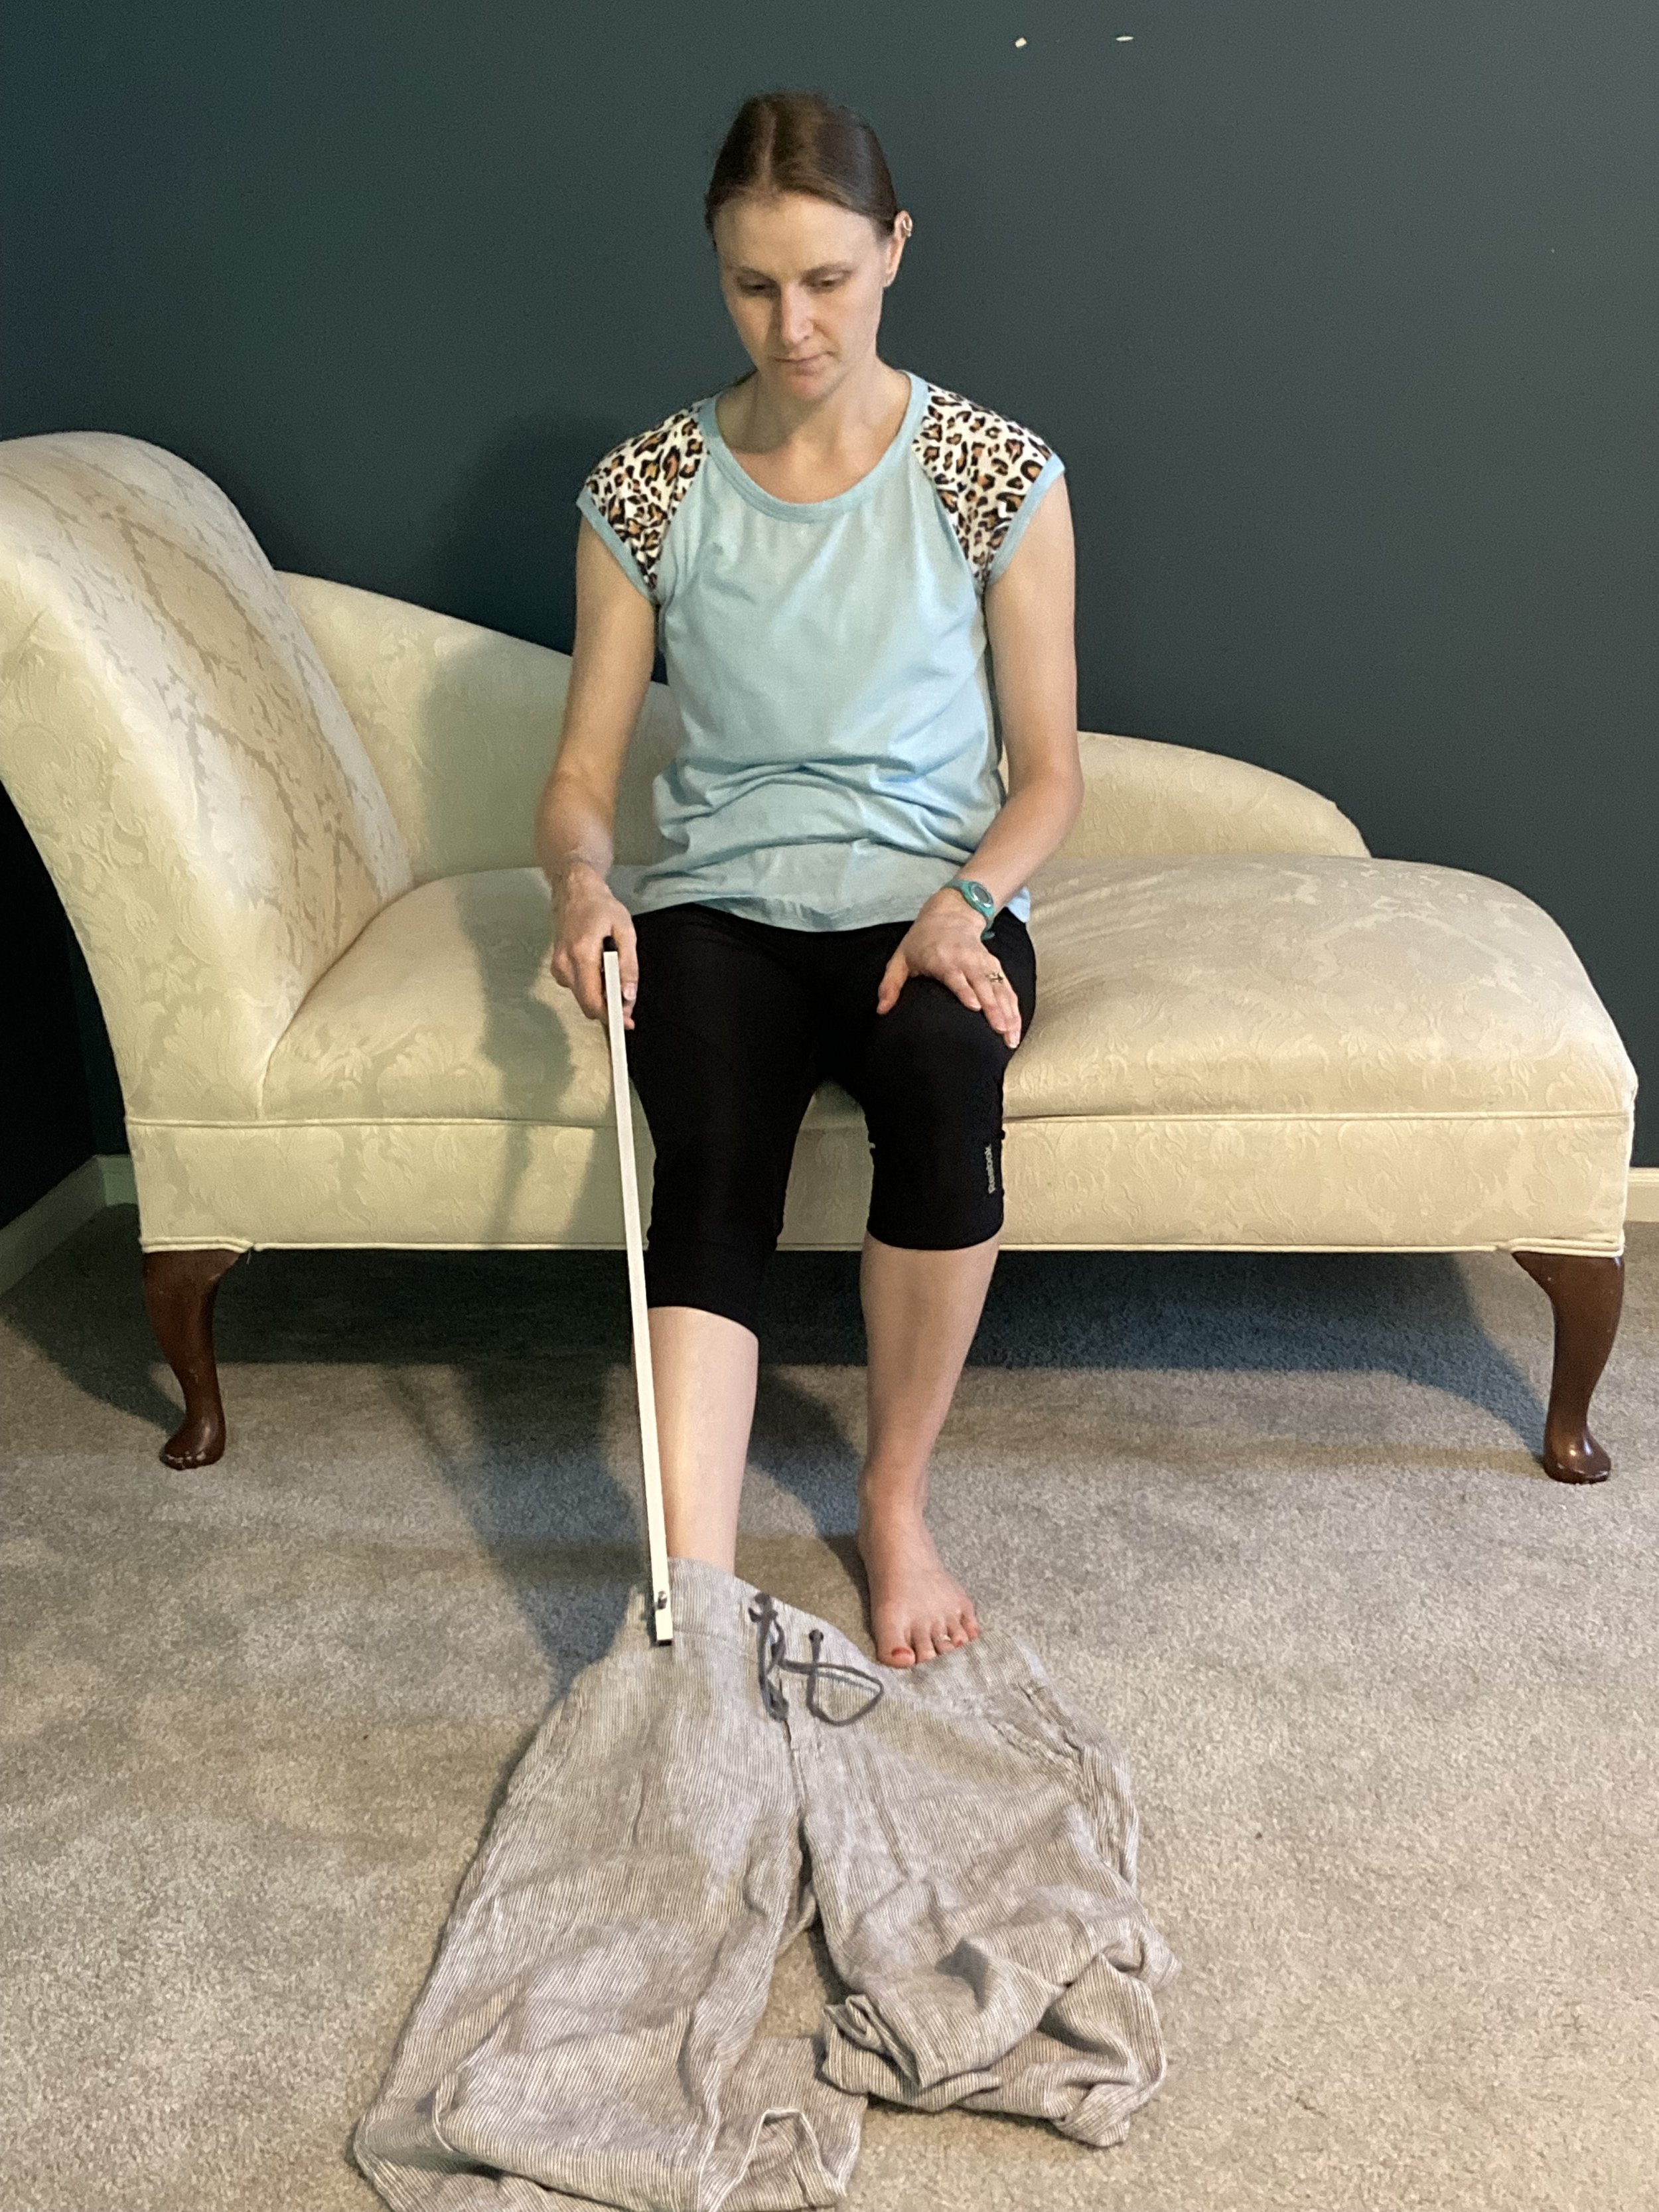 How Do I Get Dressed with Hip Precautions? — Threshold Therapeutic, LLC